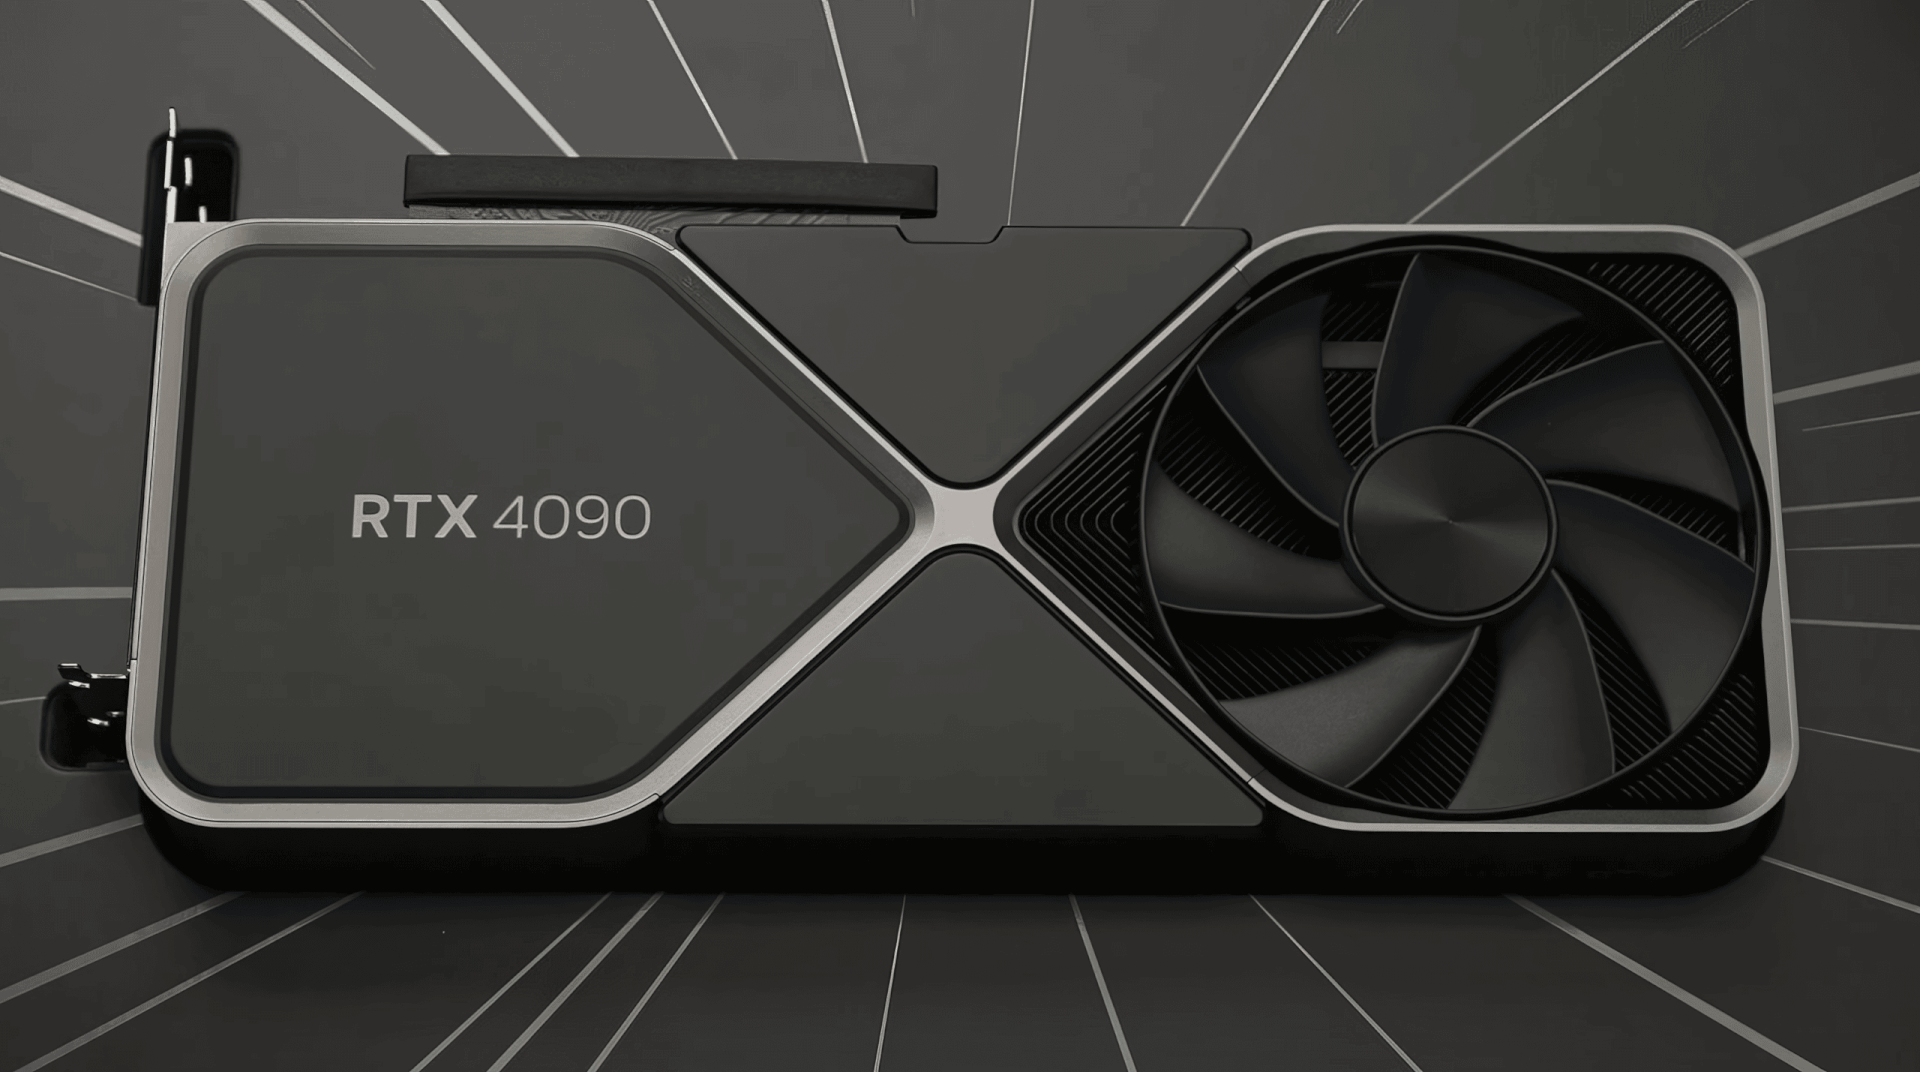 https://www.hardwaretimes.com/wp-content/uploads/2022/09/NVIDIA-GeForce-RTX-4090-Graphics-Card-_1-low_res-scale-4_00x-Custom.png